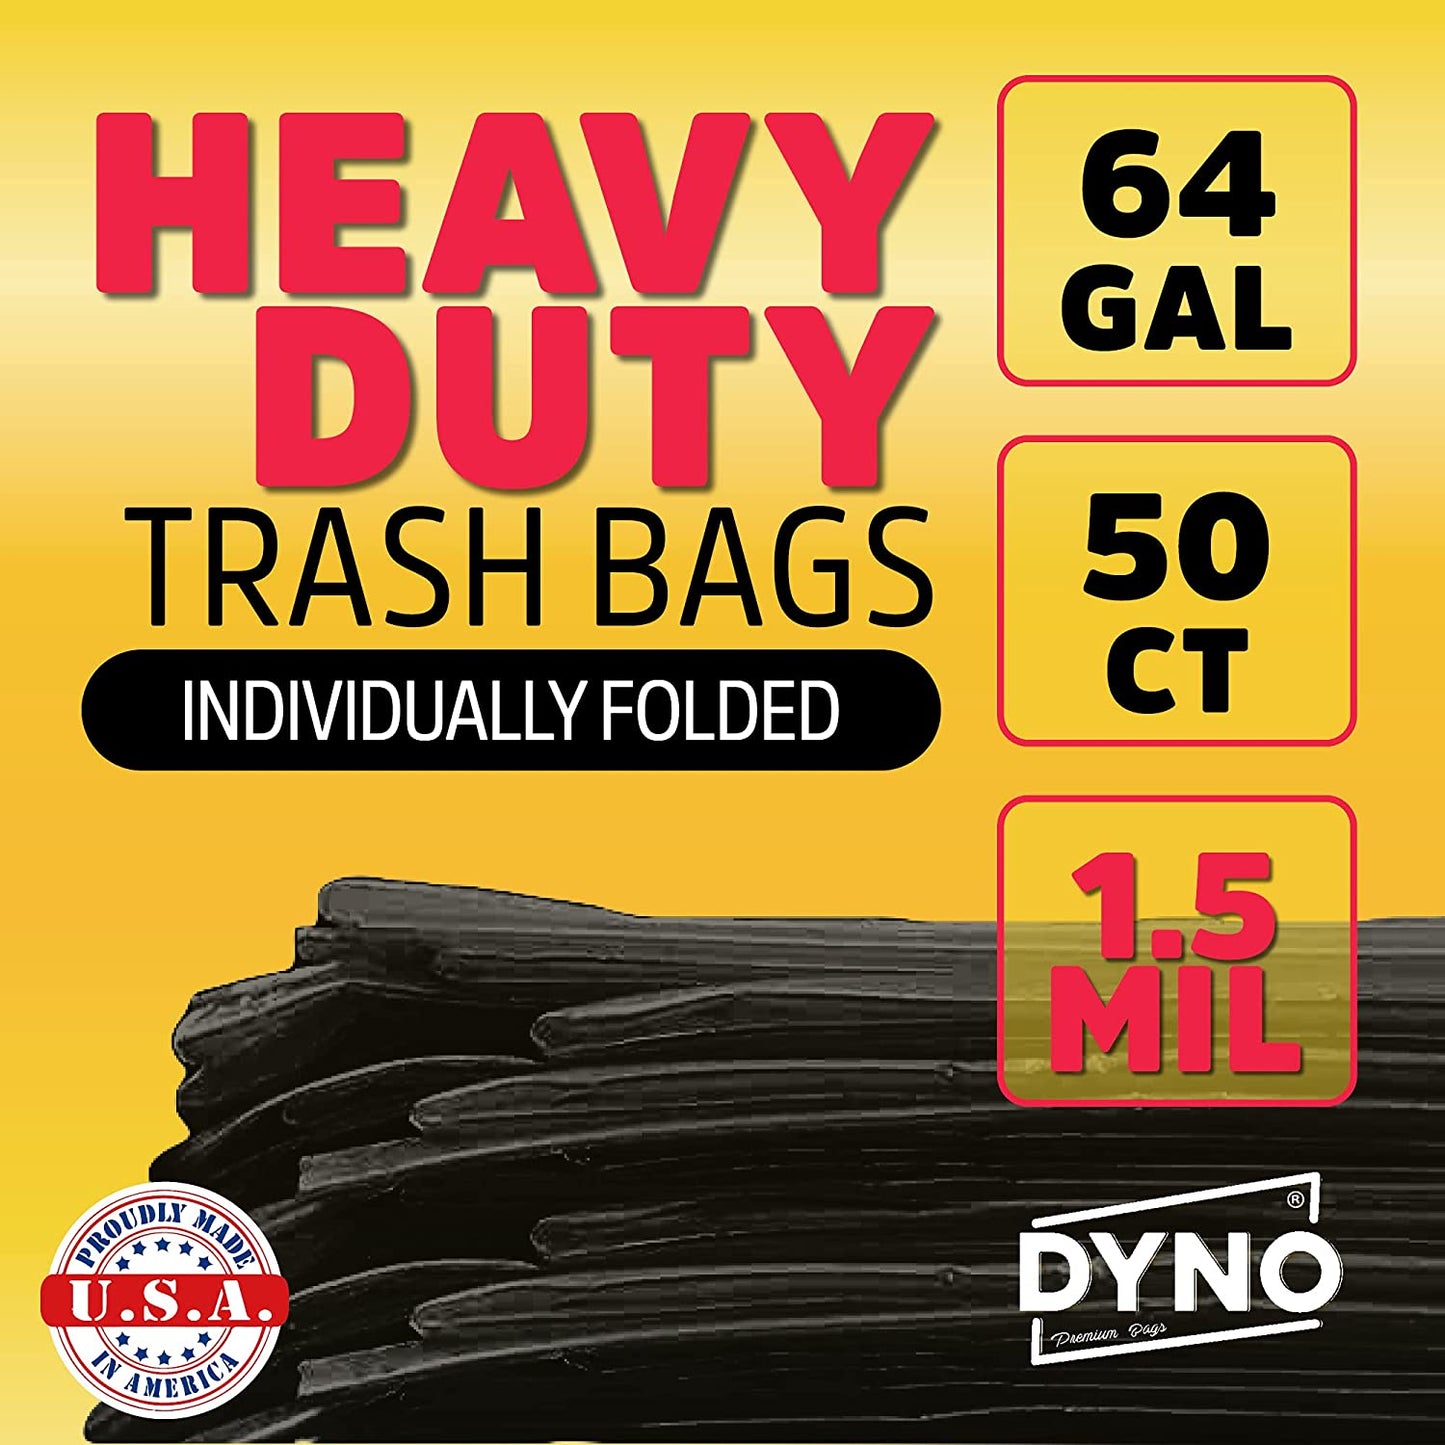 Dyno Products Online 64-Gallon, 1.5 Mil Thick Heavy-Duty Black Trash Bags - 50 Count Extra Large Plastic Garbage Liners Fit Huge Cans for Home Garden Lawn Yard Recycling Construction & Commercial Use